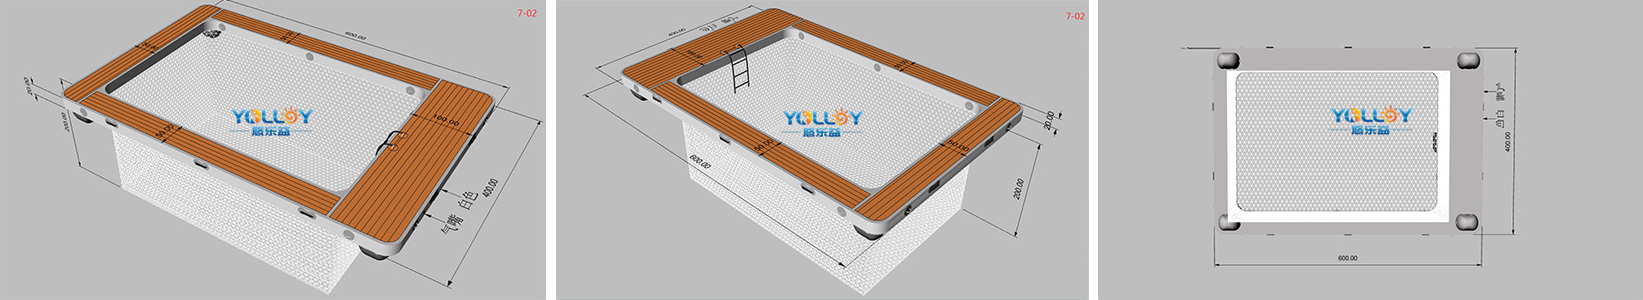 3D design drawing of inflatable jellyfish yacht pool